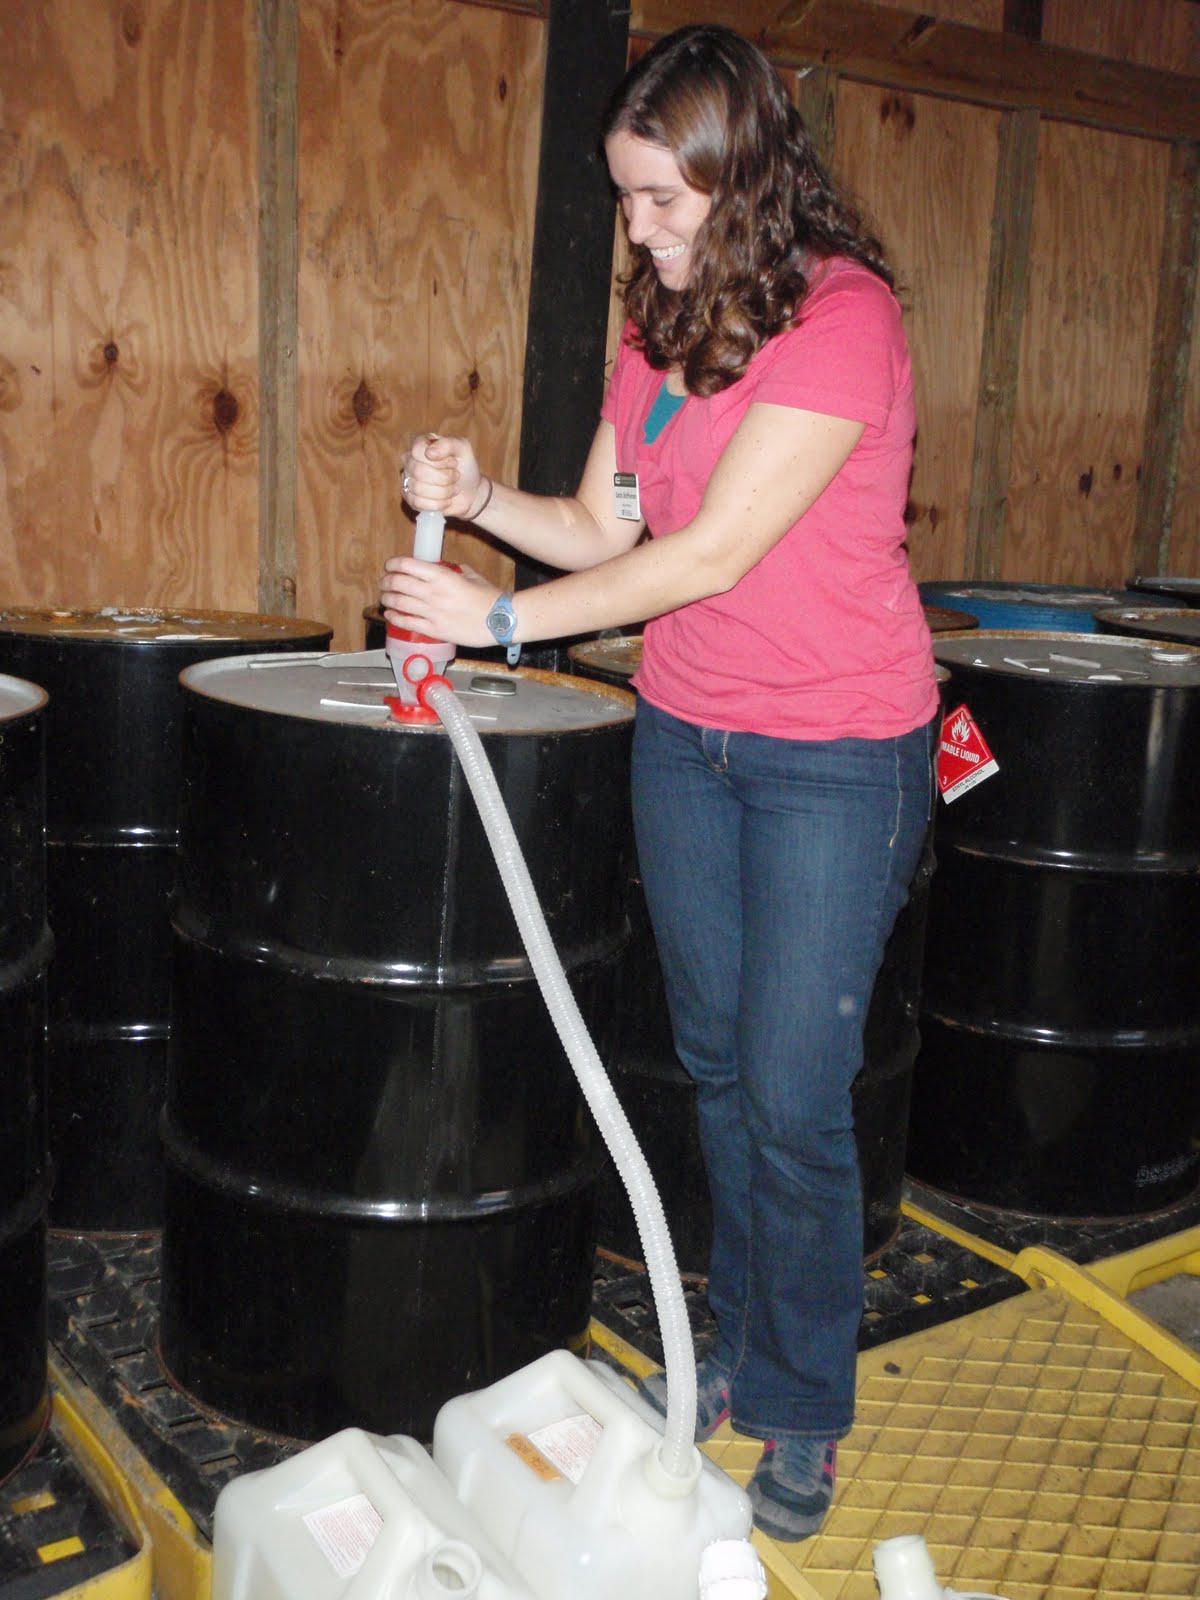 Sarah pumping ethanol out of a 55 gallon drum of ethanol